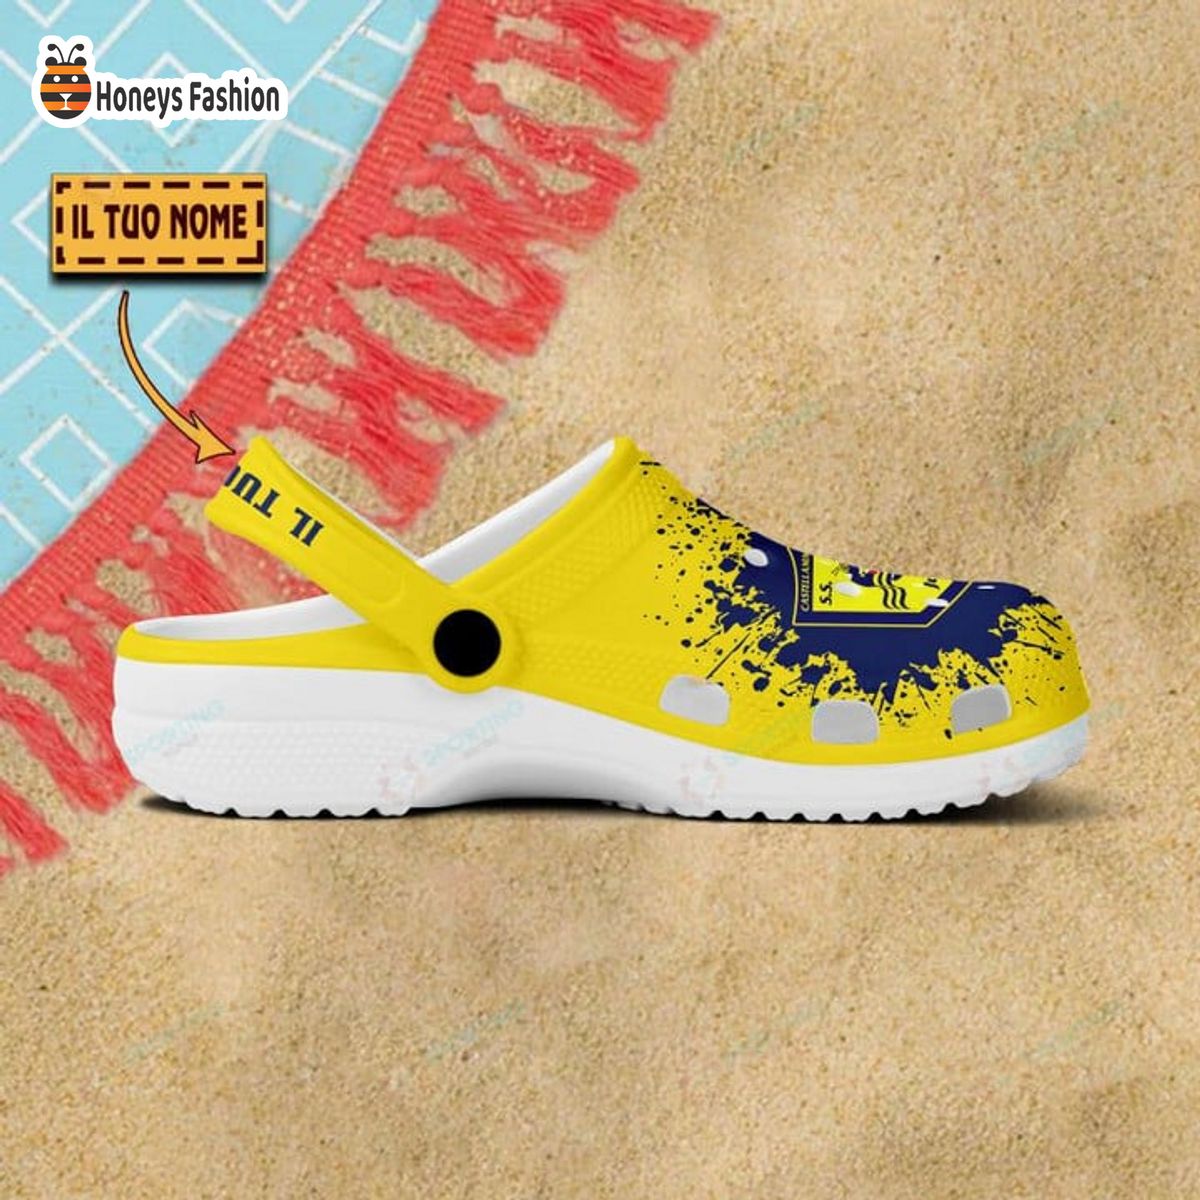 S.S. Juve Stabia personalized classic crocs